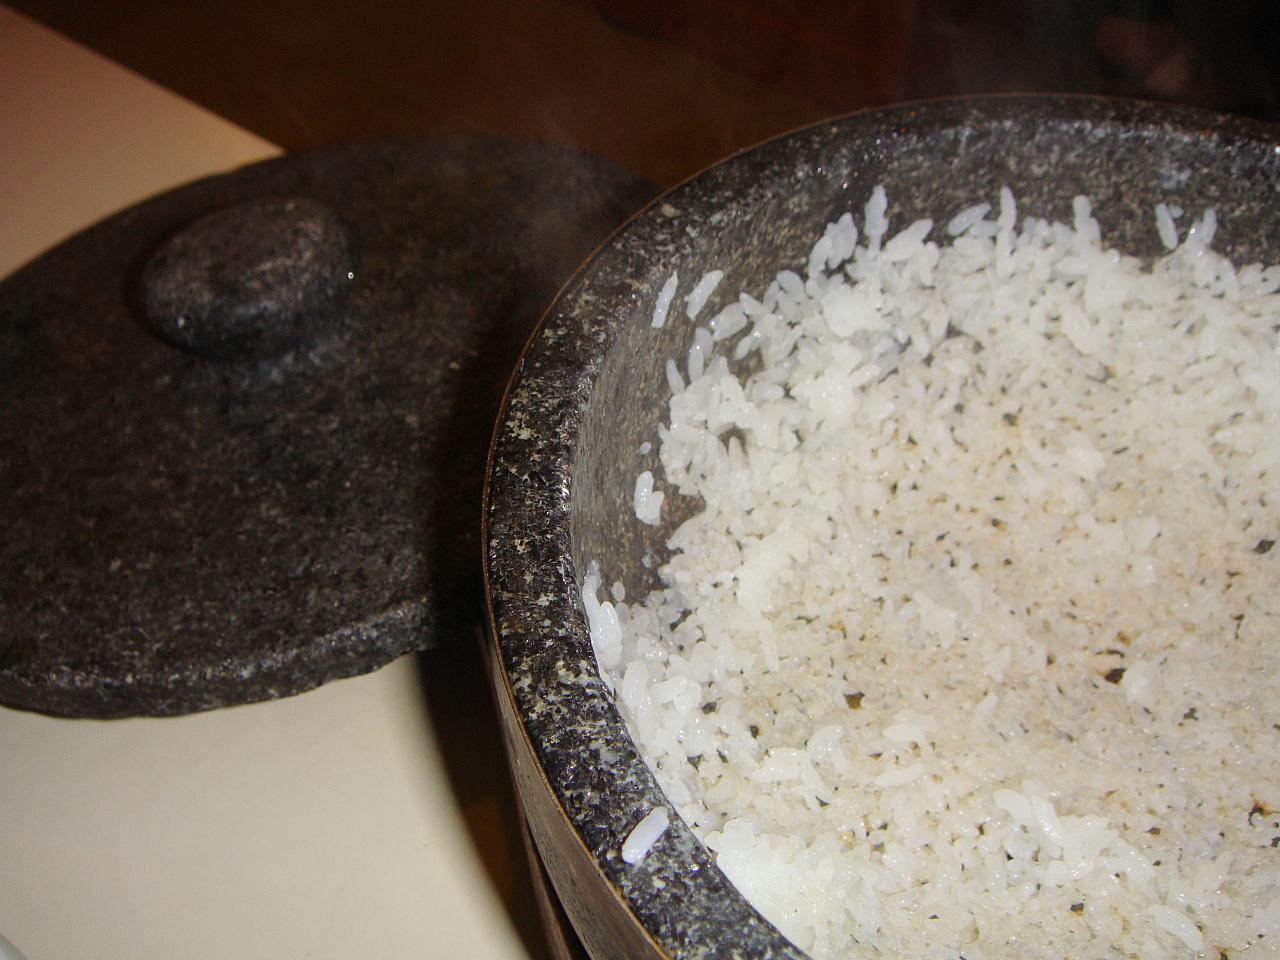 Traditionally cooked rice